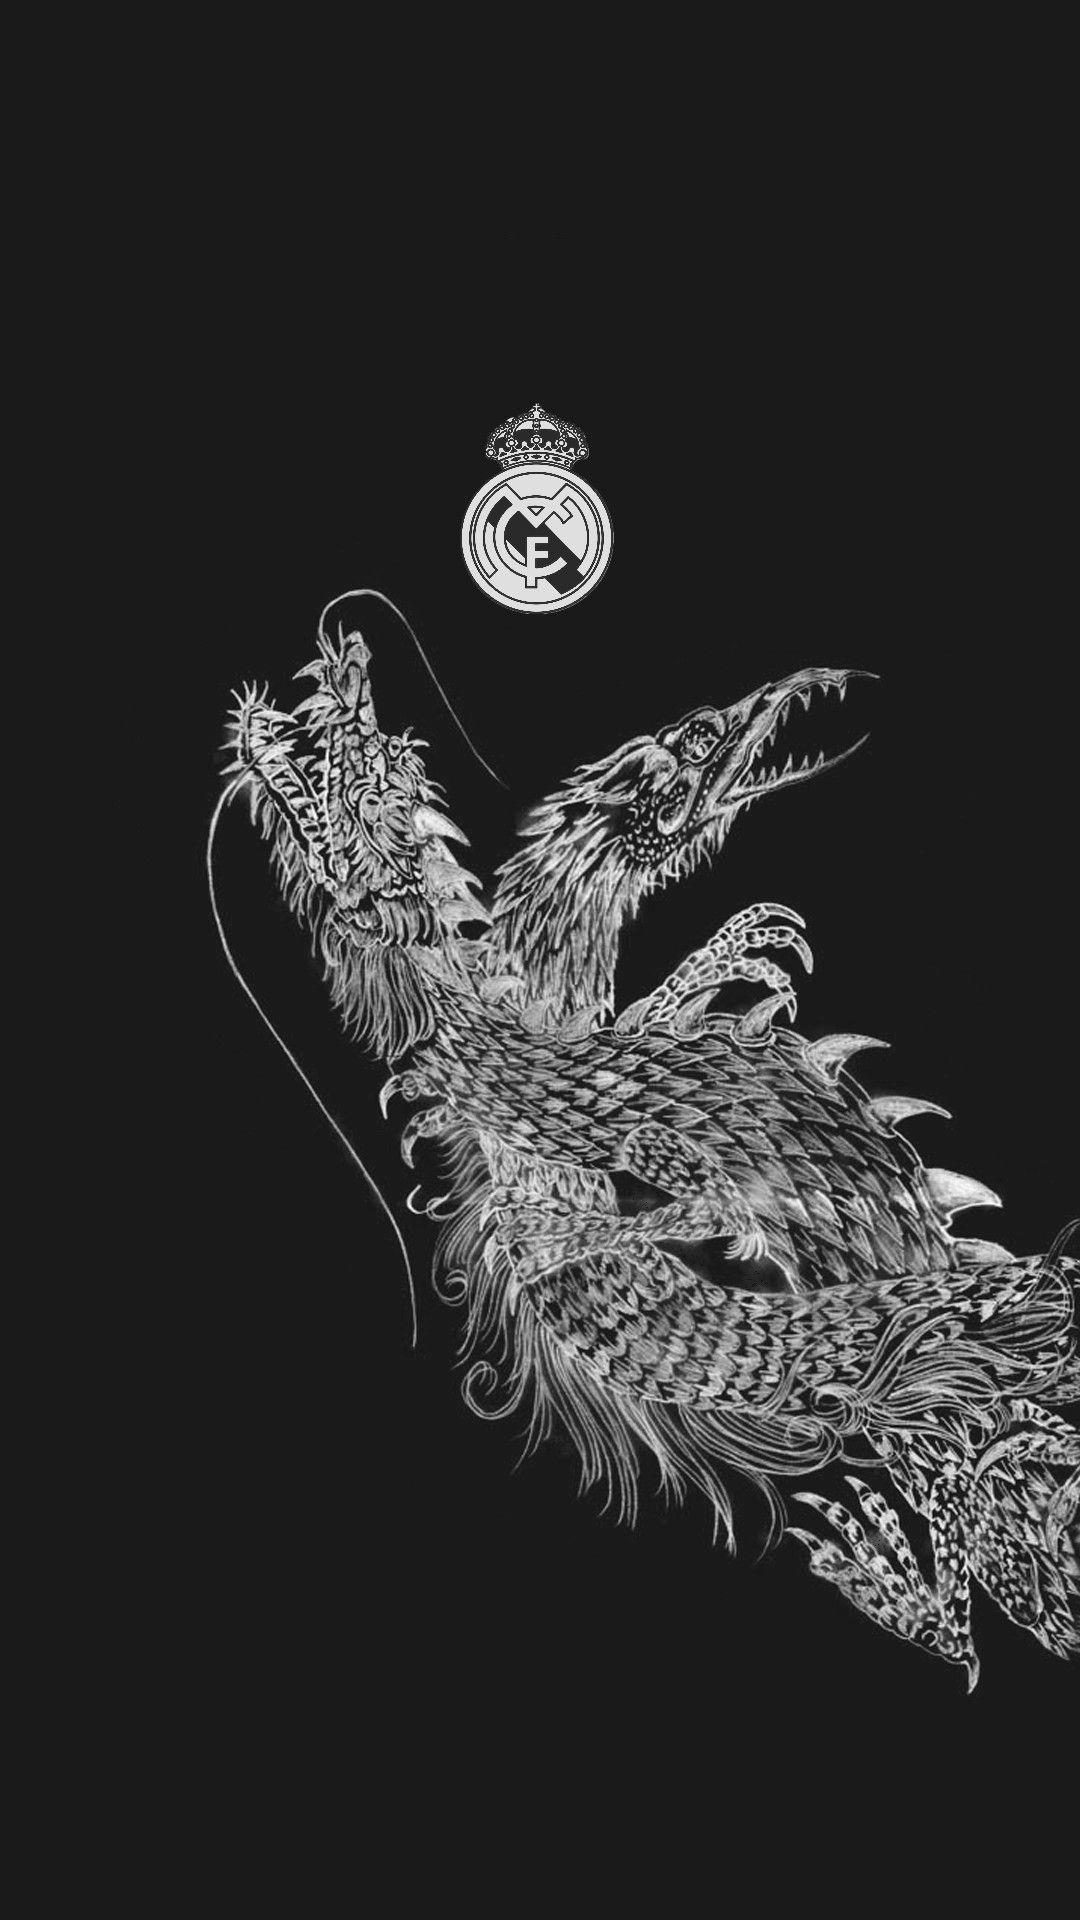 Real Madrid Wallpaper Black And White